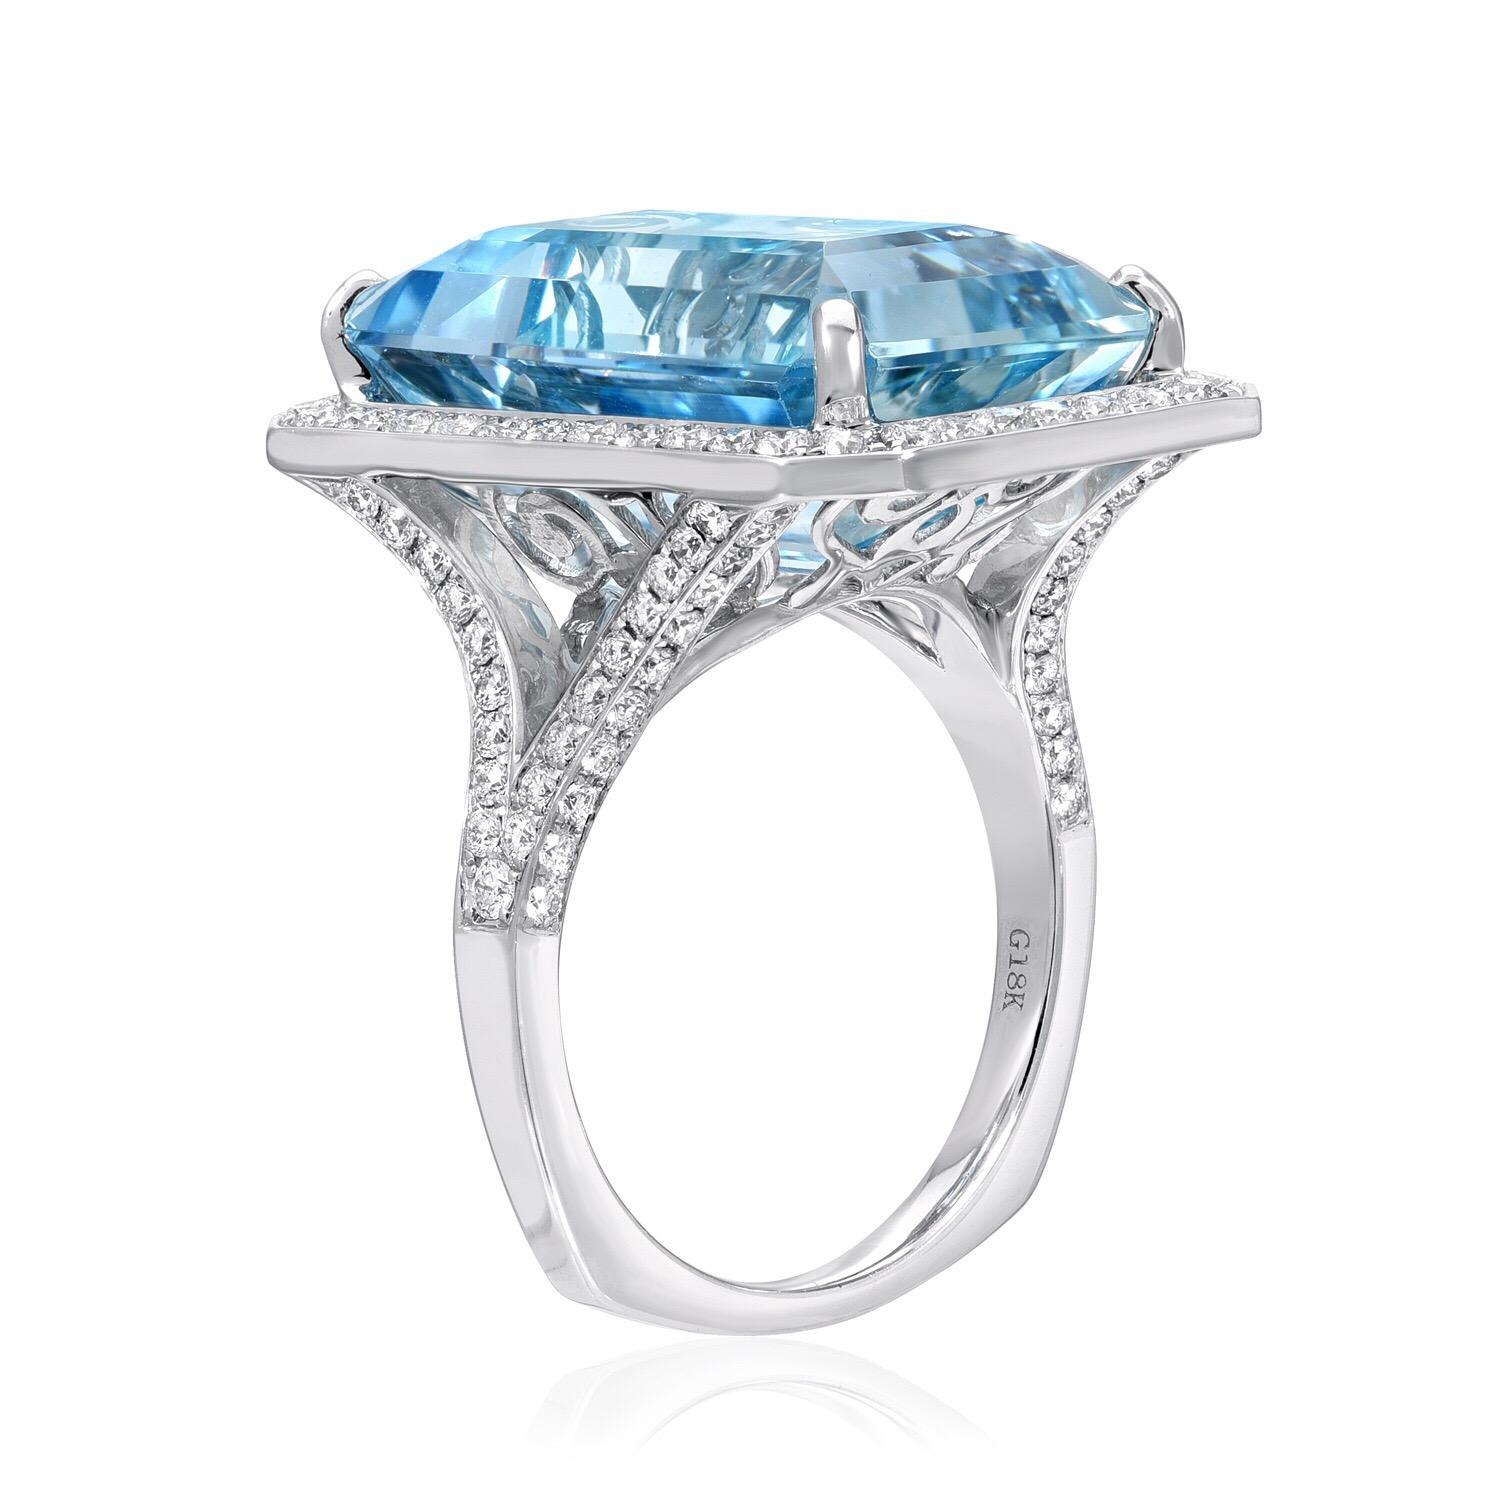 Emerald cut Aquamarine weighing a total of 15 carats, set in a 1.20 carat Diamond, 18K white gold ring.
Ring size 6.5. Resizing is complementary upon request.
Returns are accepted and paid by us within 7 days of delivery. 

Aquamarine is the